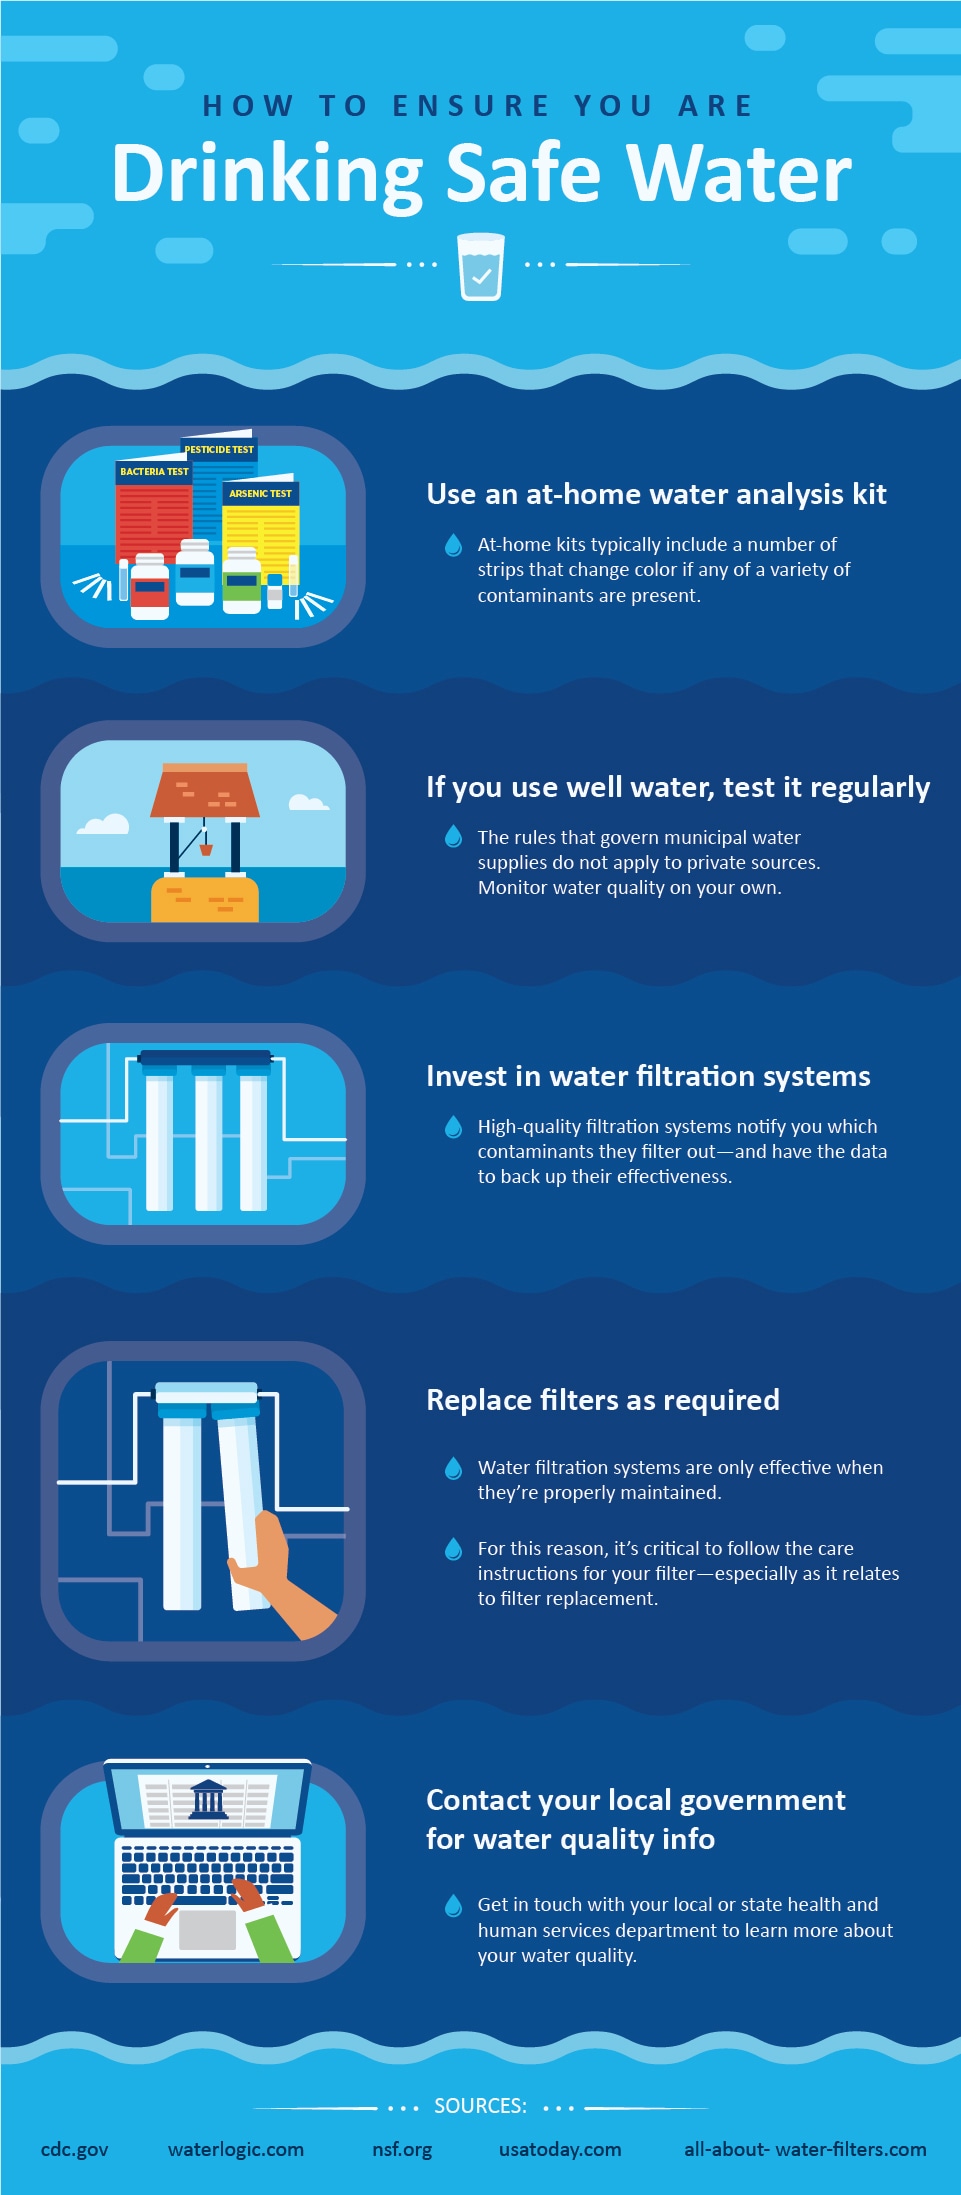 How to ensure you are drinking safe water